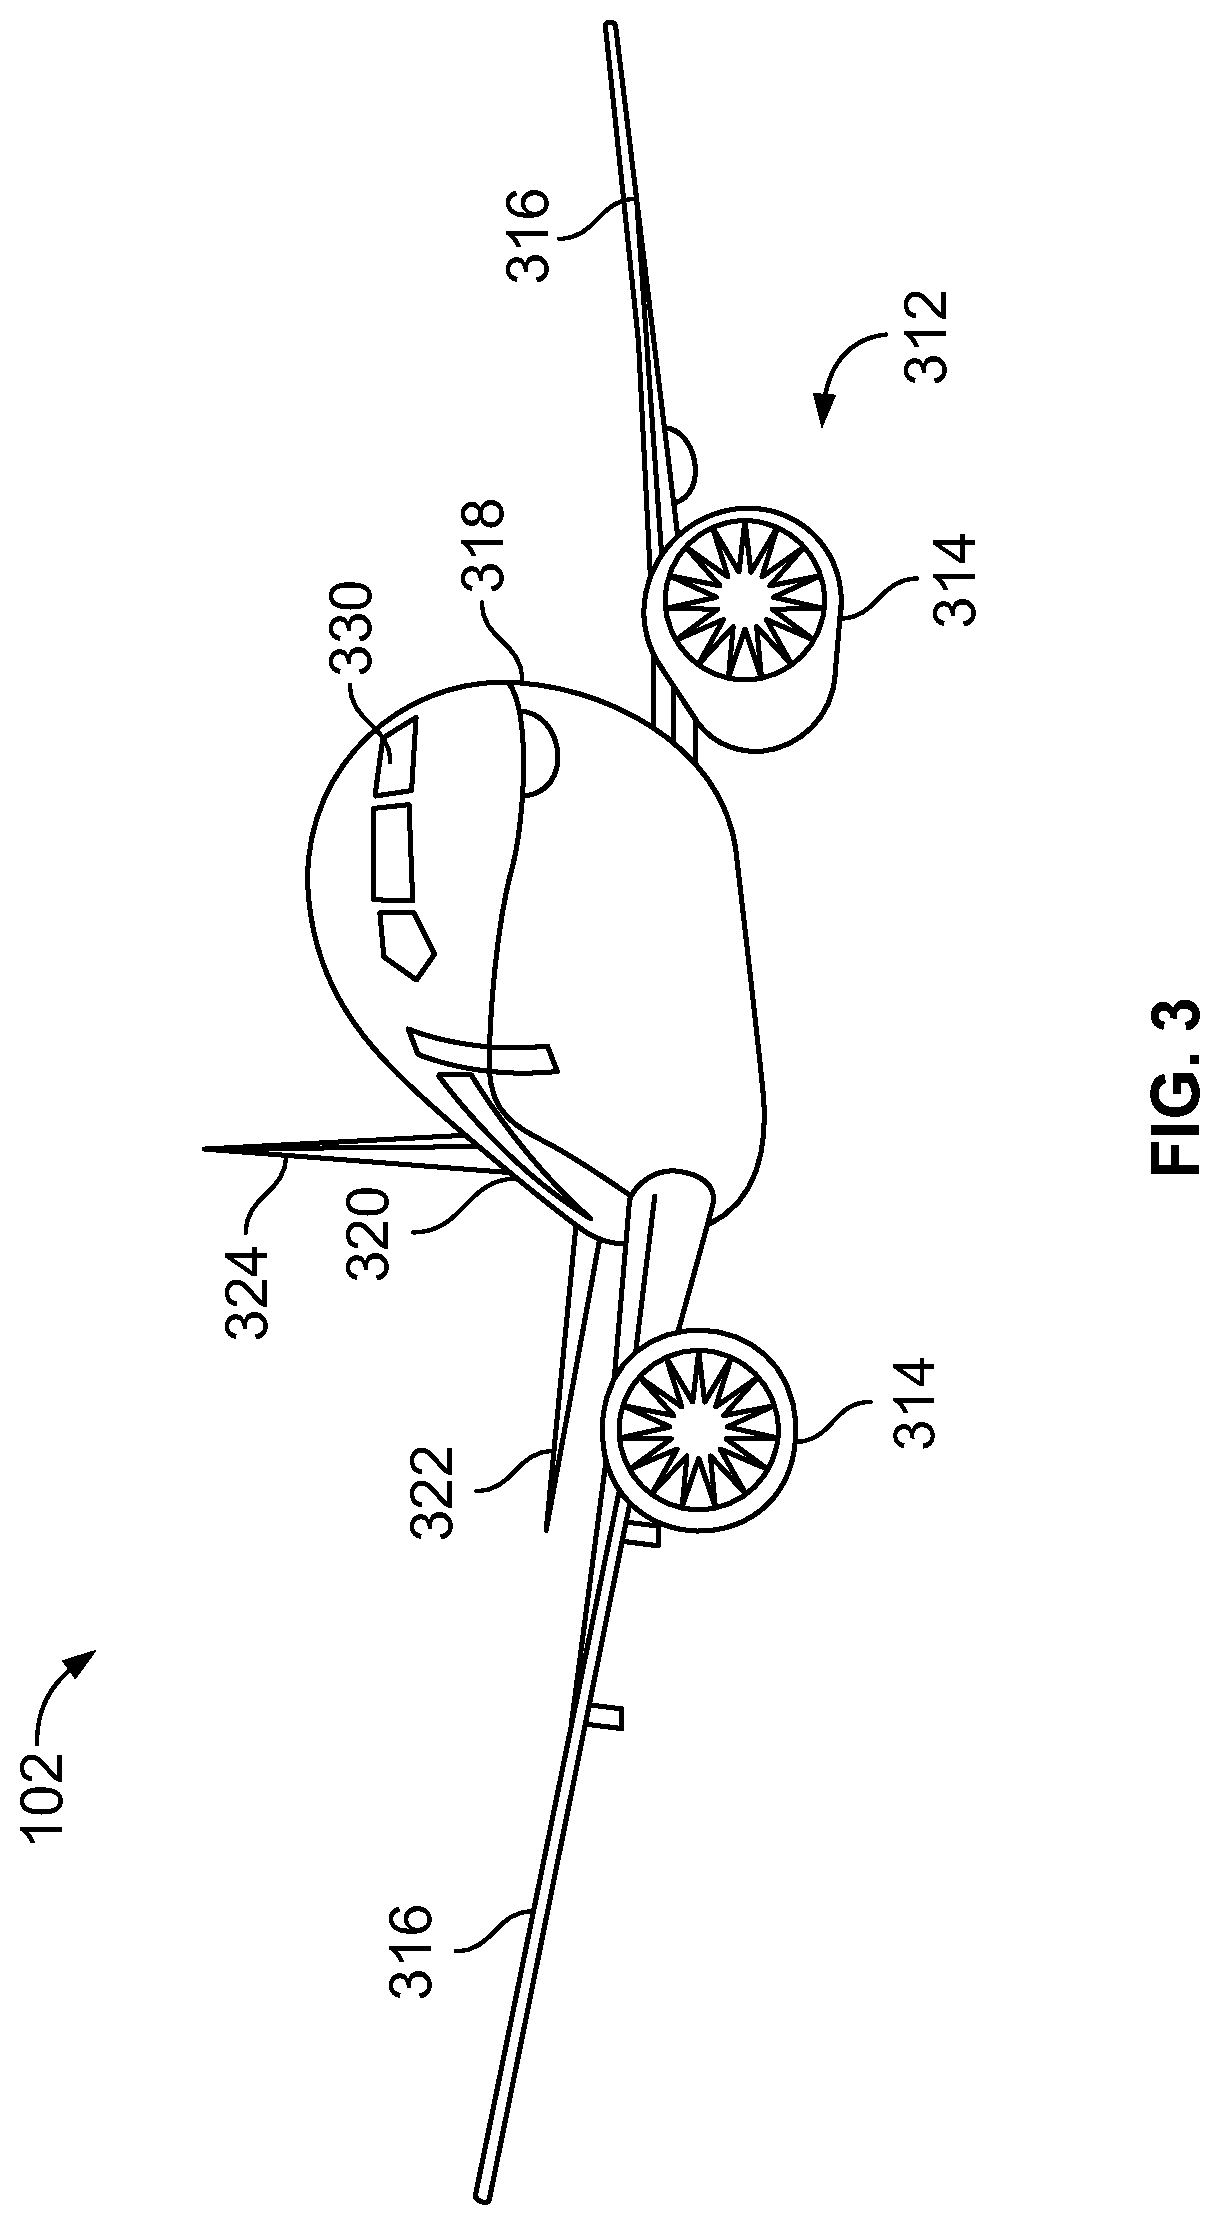 Systems and methods for detecting air turbulence within an air space